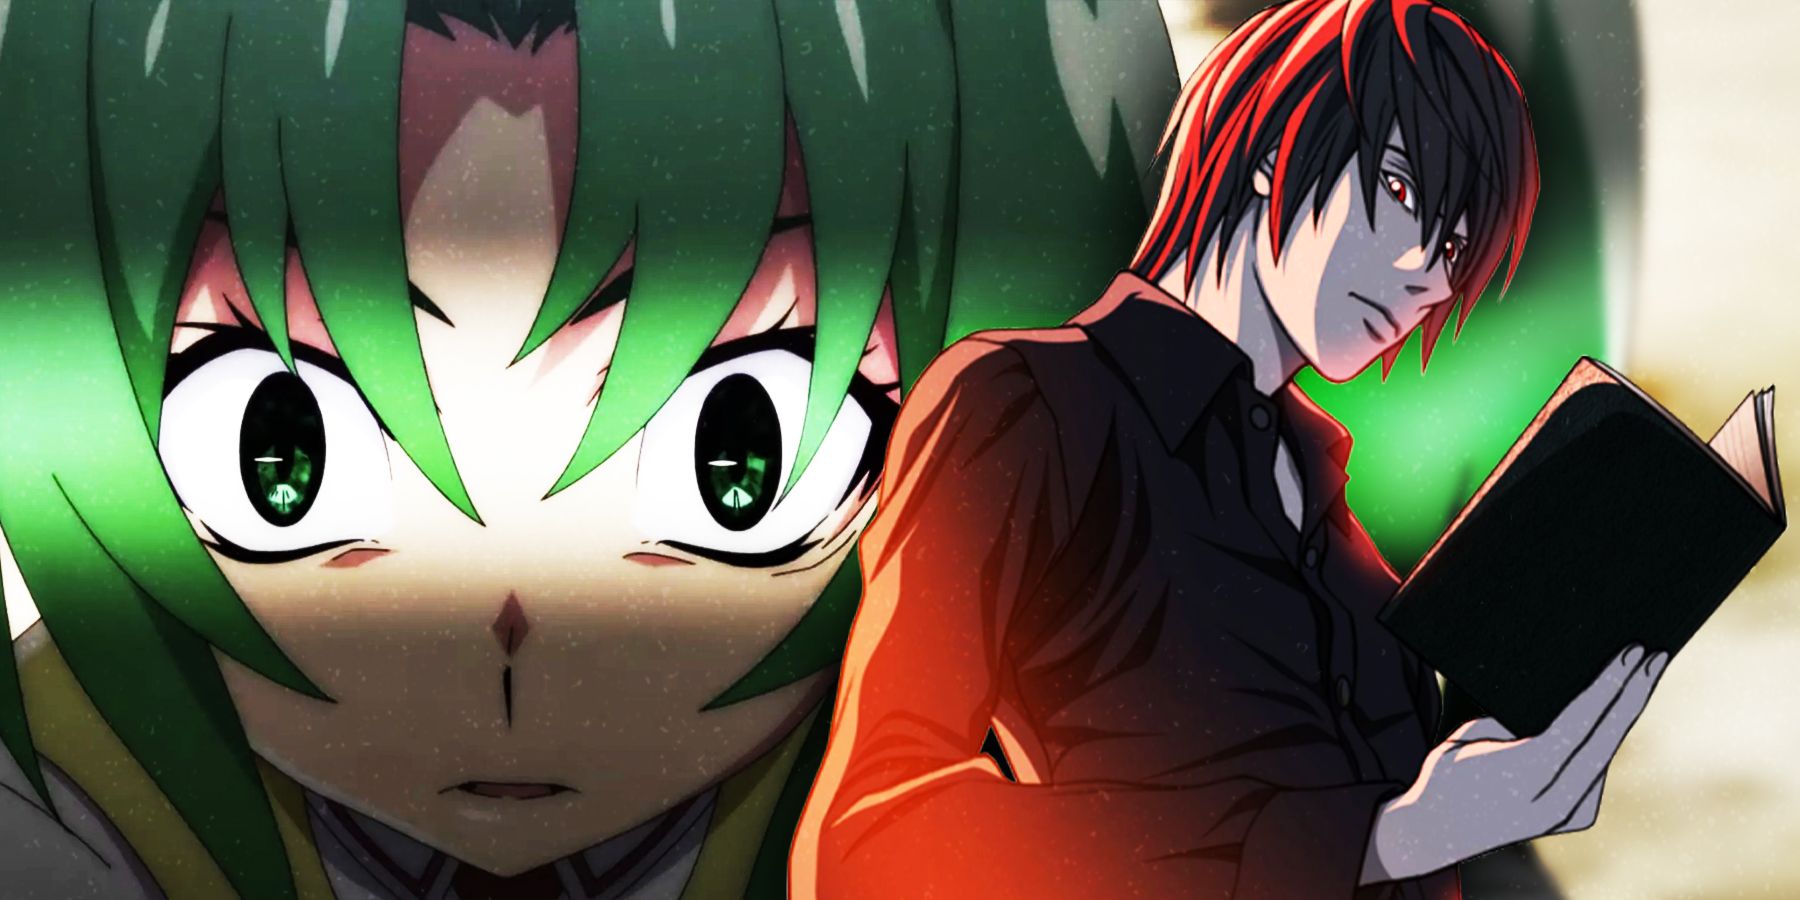 20 Must-Watch Detective Anime